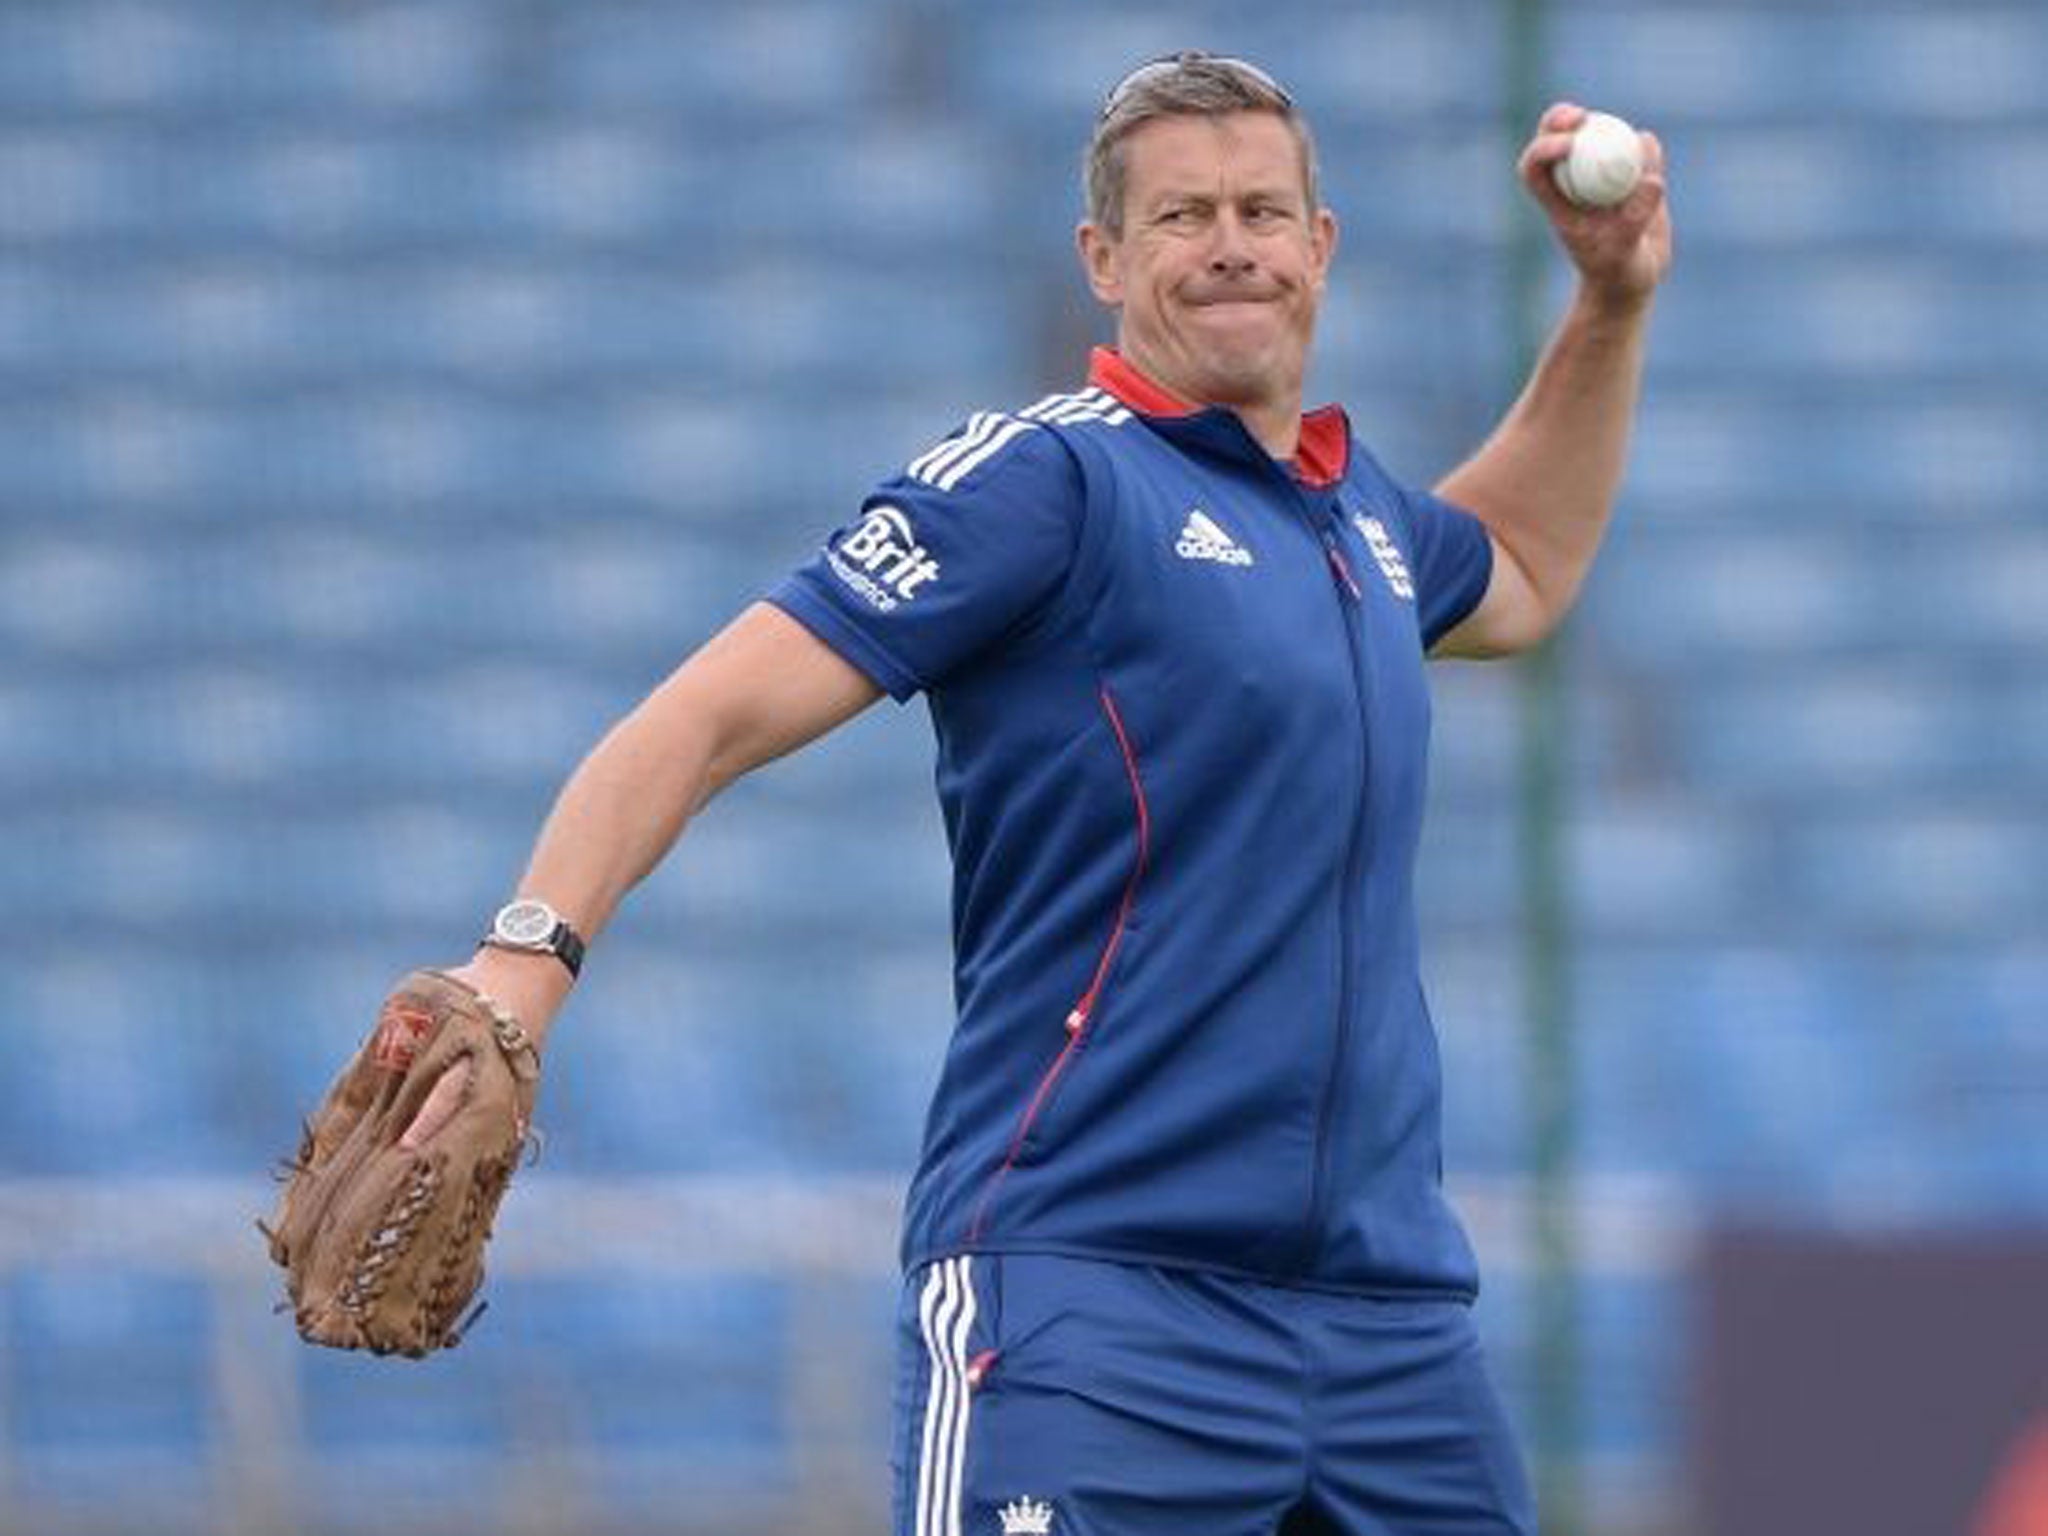 Limited role: Ashley Giles is unlikely to continue as one-day coach only